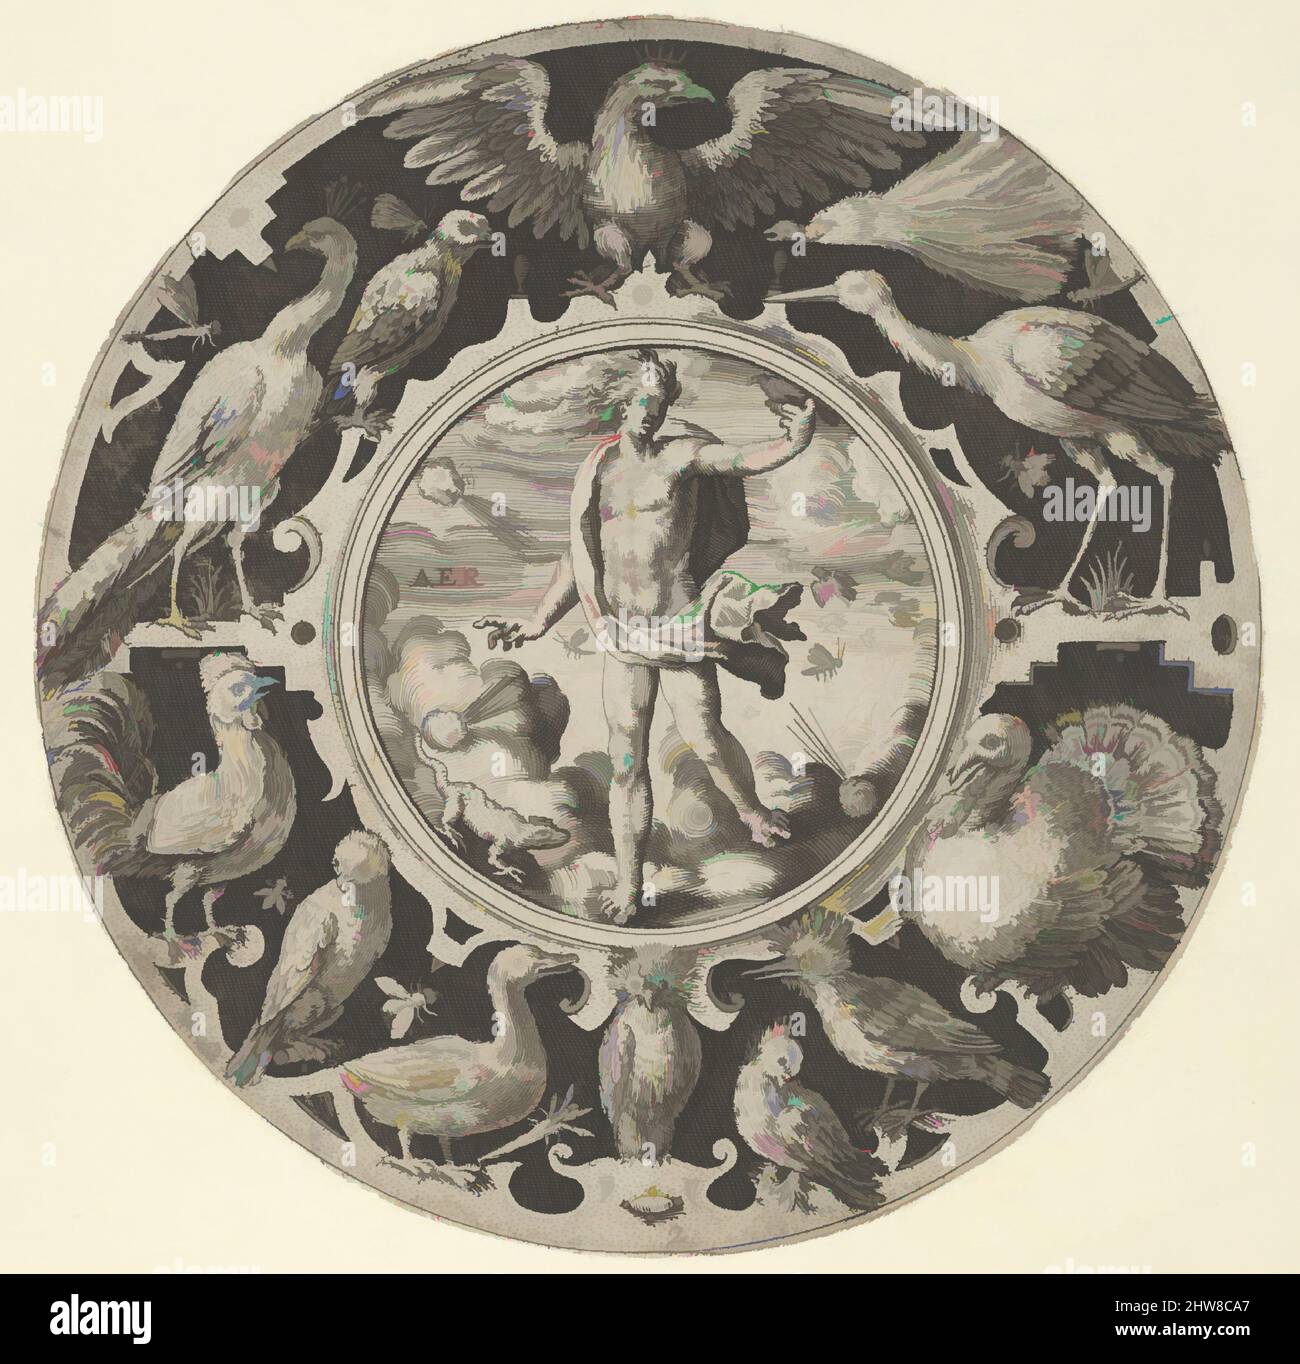 Art inspired by Aer' in a Decorative Border with Birds, from a Series of Circular Designs with the Four Elements, 1590–1612, Engraving, Sheet: 4 7/8 × 4 15/16 in. (12.4 × 12.5 cm), Crispijn de Passe the Elder (Netherlandish, Arnemuiden 1564–1637 Utrecht), Design for a circular plate, Classic works modernized by Artotop with a splash of modernity. Shapes, color and value, eye-catching visual impact on art. Emotions through freedom of artworks in a contemporary way. A timeless message pursuing a wildly creative new direction. Artists turning to the digital medium and creating the Artotop NFT Stock Photo